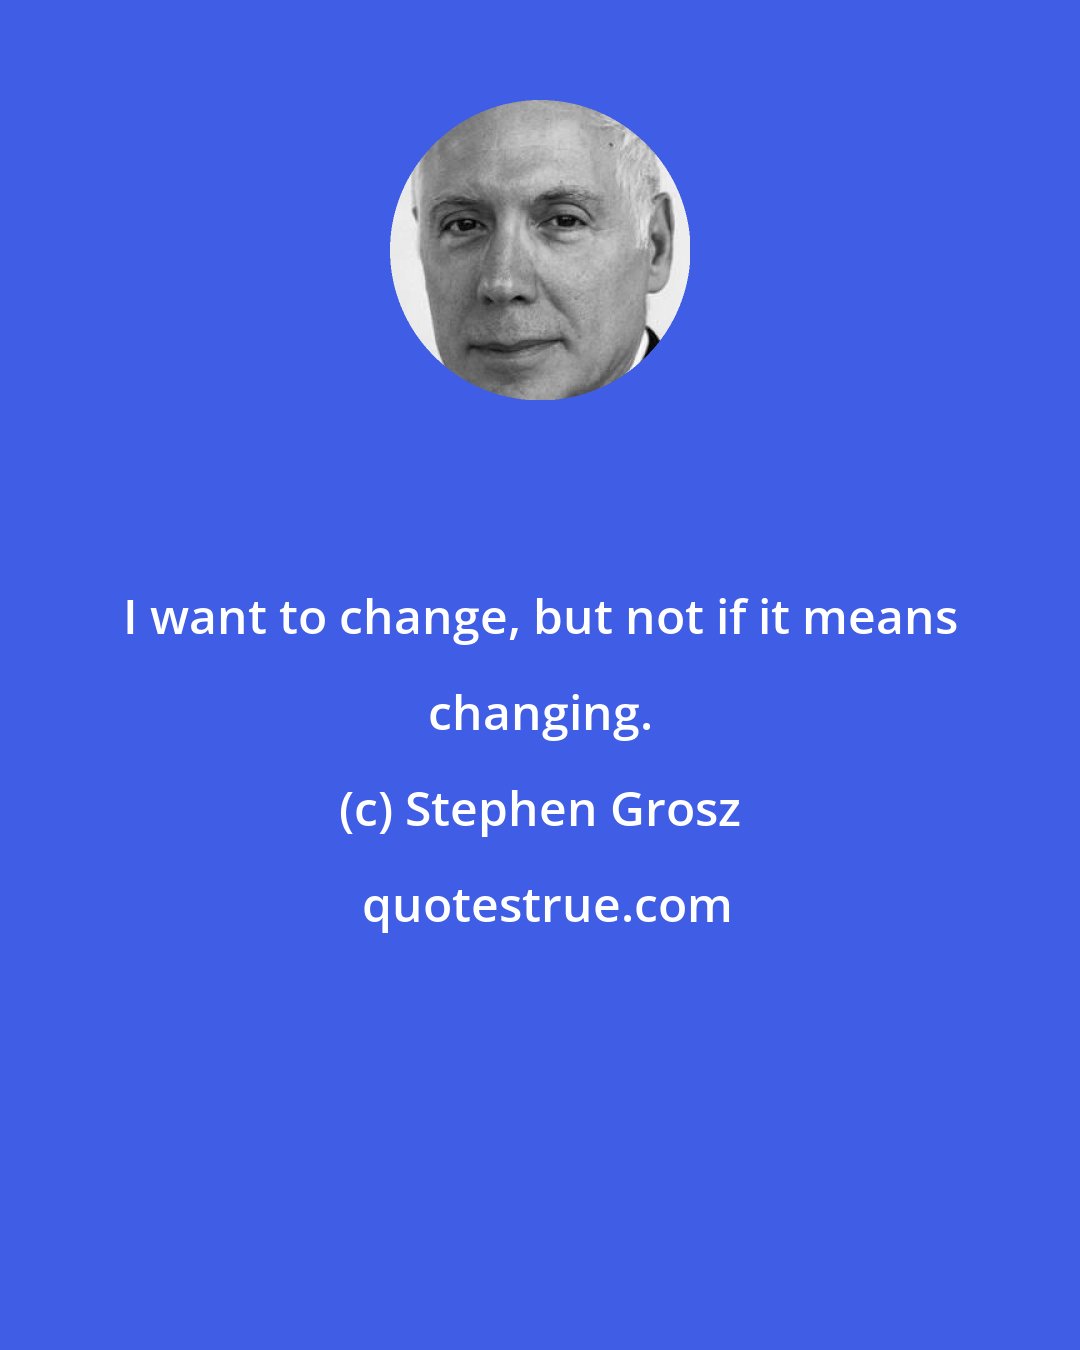 Stephen Grosz: I want to change, but not if it means changing.